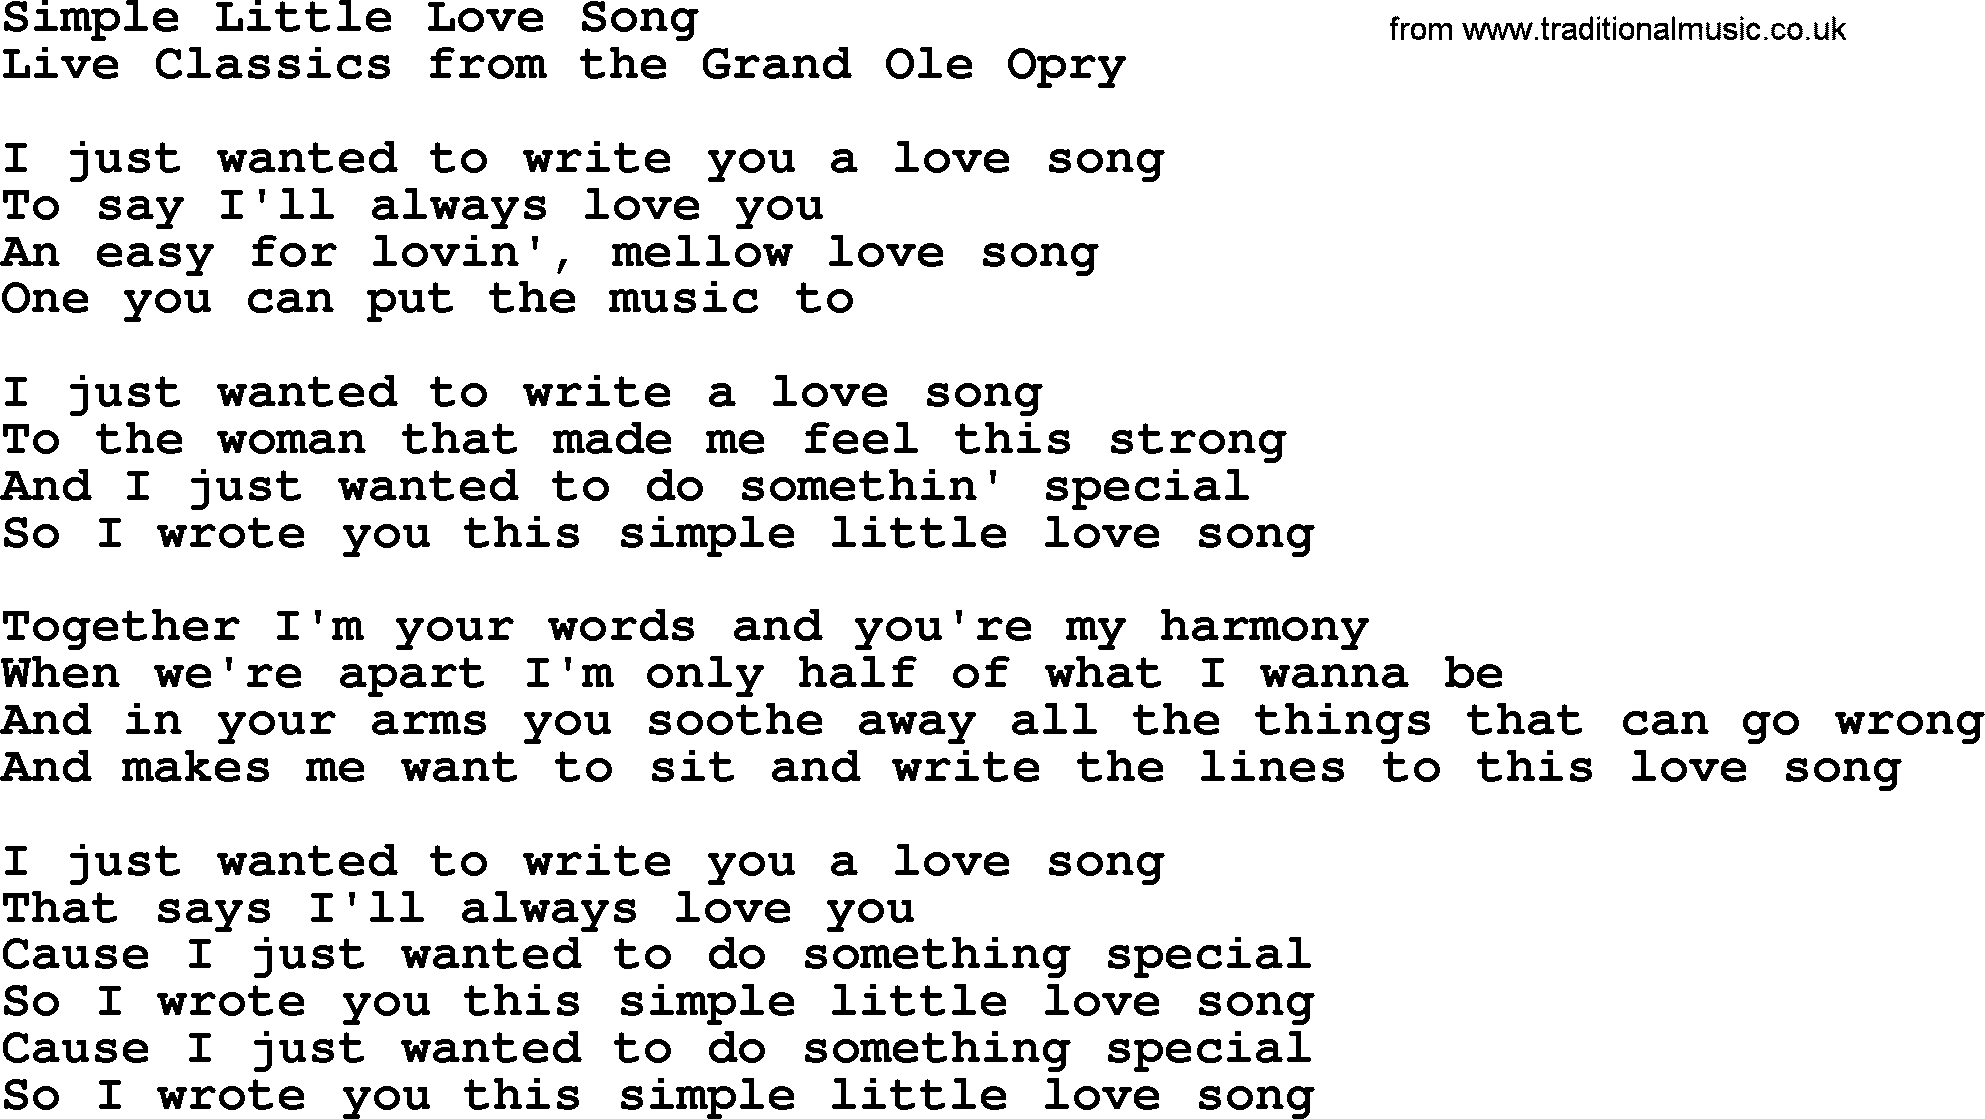 Marty Robbins song: Simple Little Love Song, lyrics